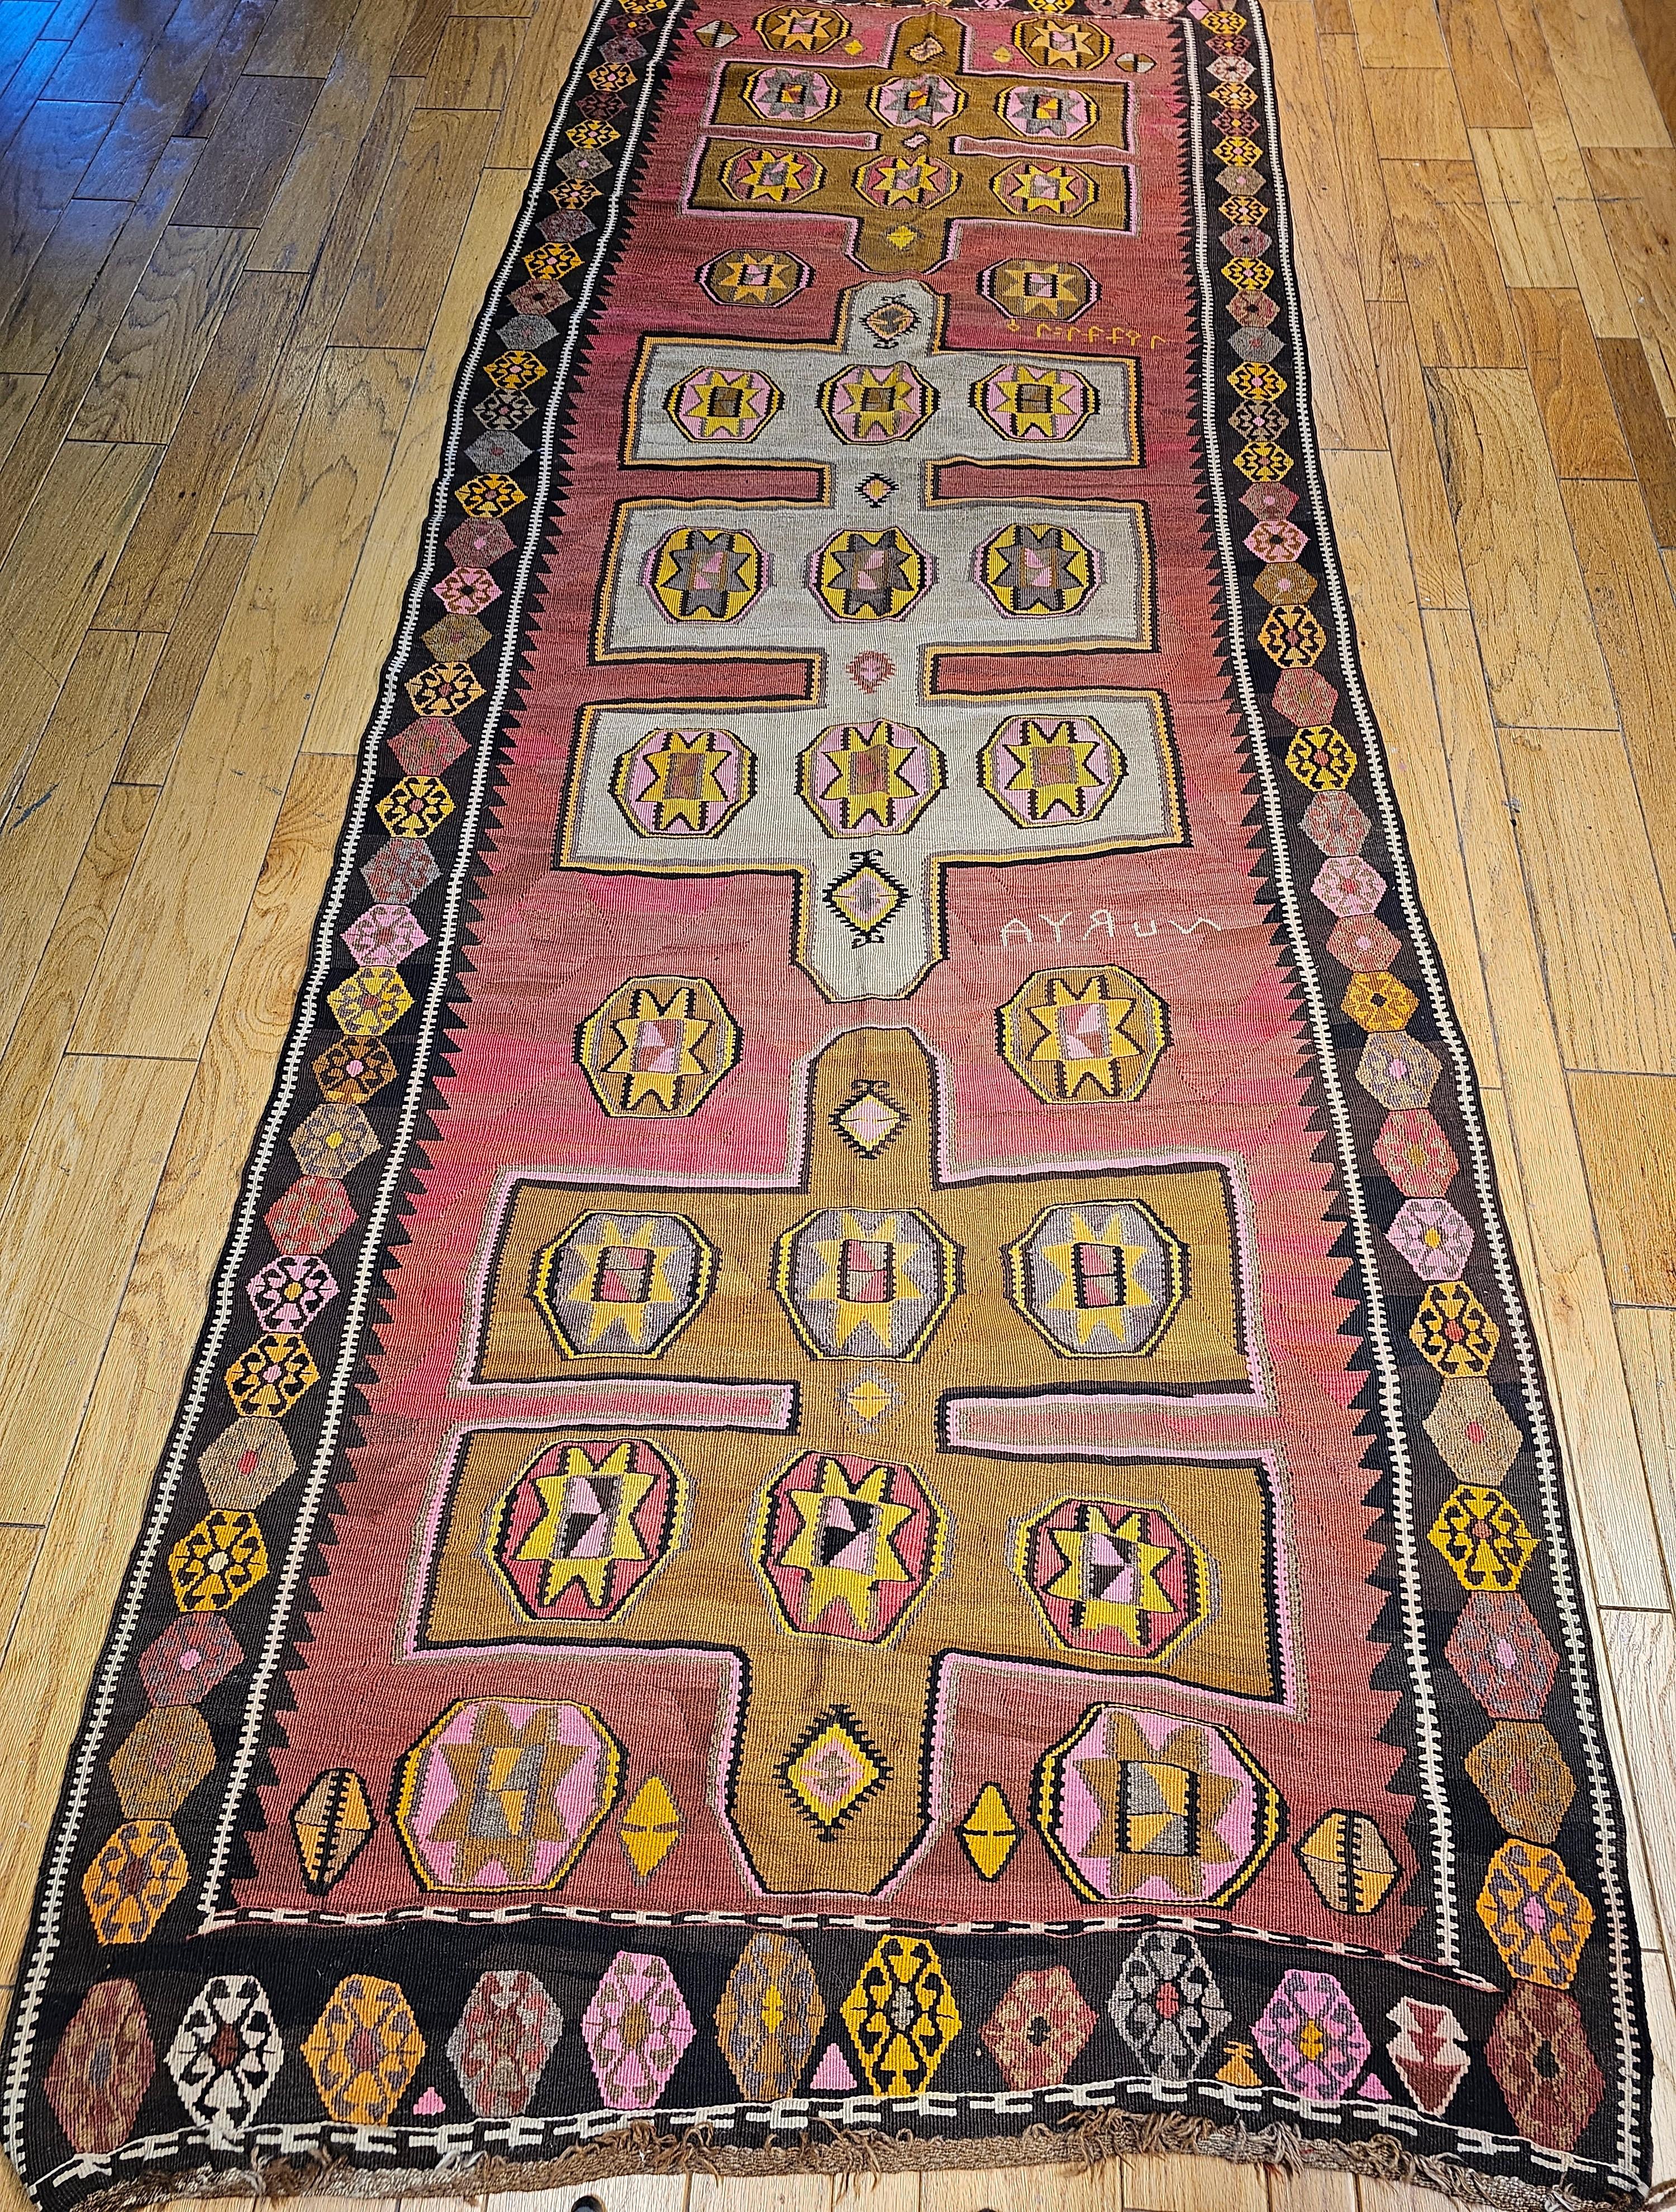 Vintage Turkish Anatolian Kilim from the early 1900s.  This kilim has bright and beautiful colors in large design, making this a unique Kilim from the Eastern Anatolian region by the Armenian weavers in the early part of the 1900s. The script in